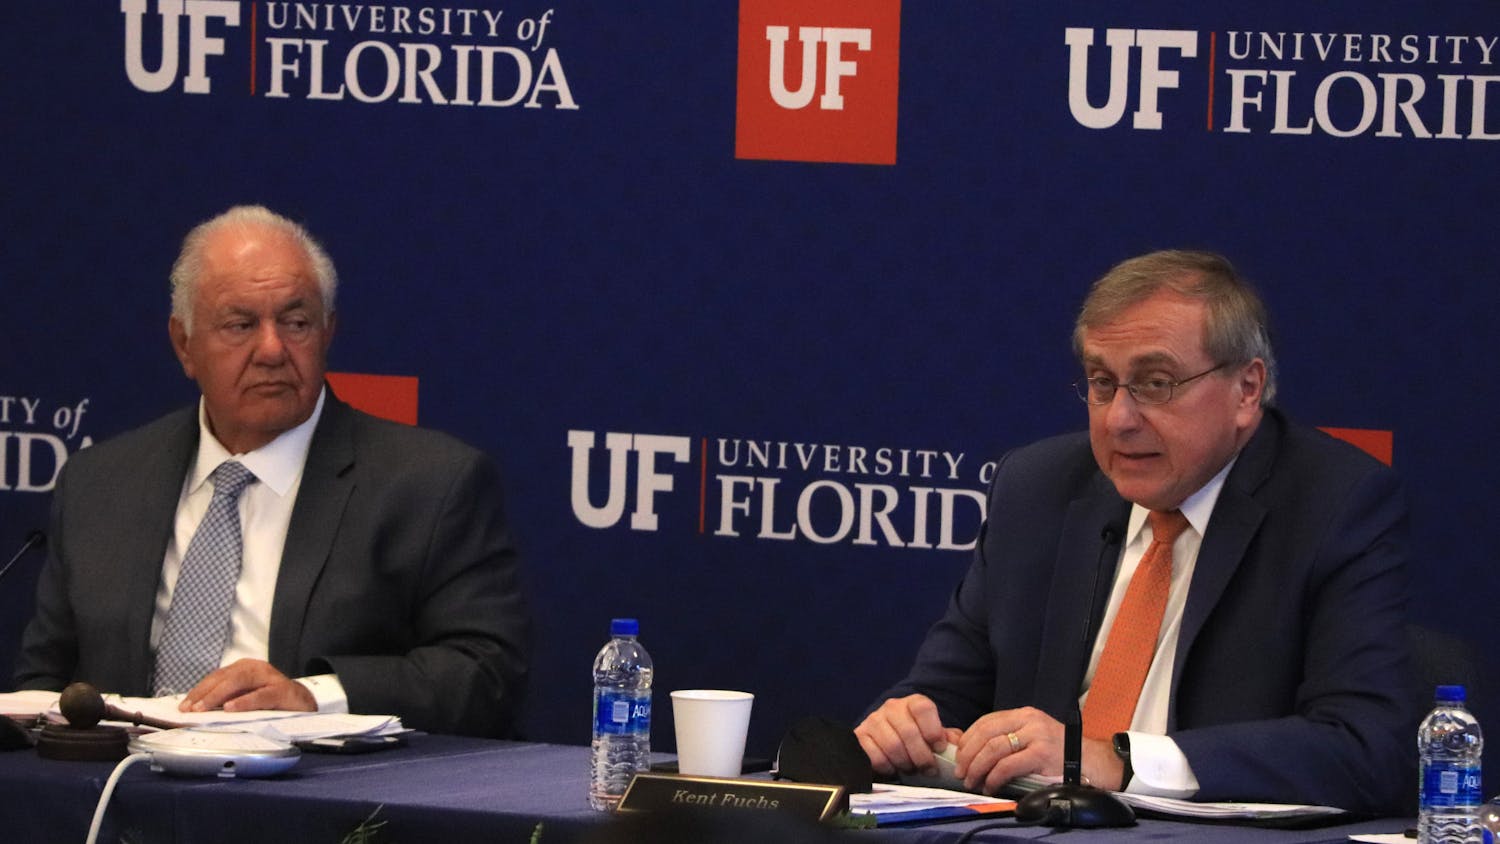 UF President Kent Fuchs and Board of Trustees Chair Mori Hosseini are seen during the meeting at Emerson Alumni Hall on Friday, Dec. 3, 2021.